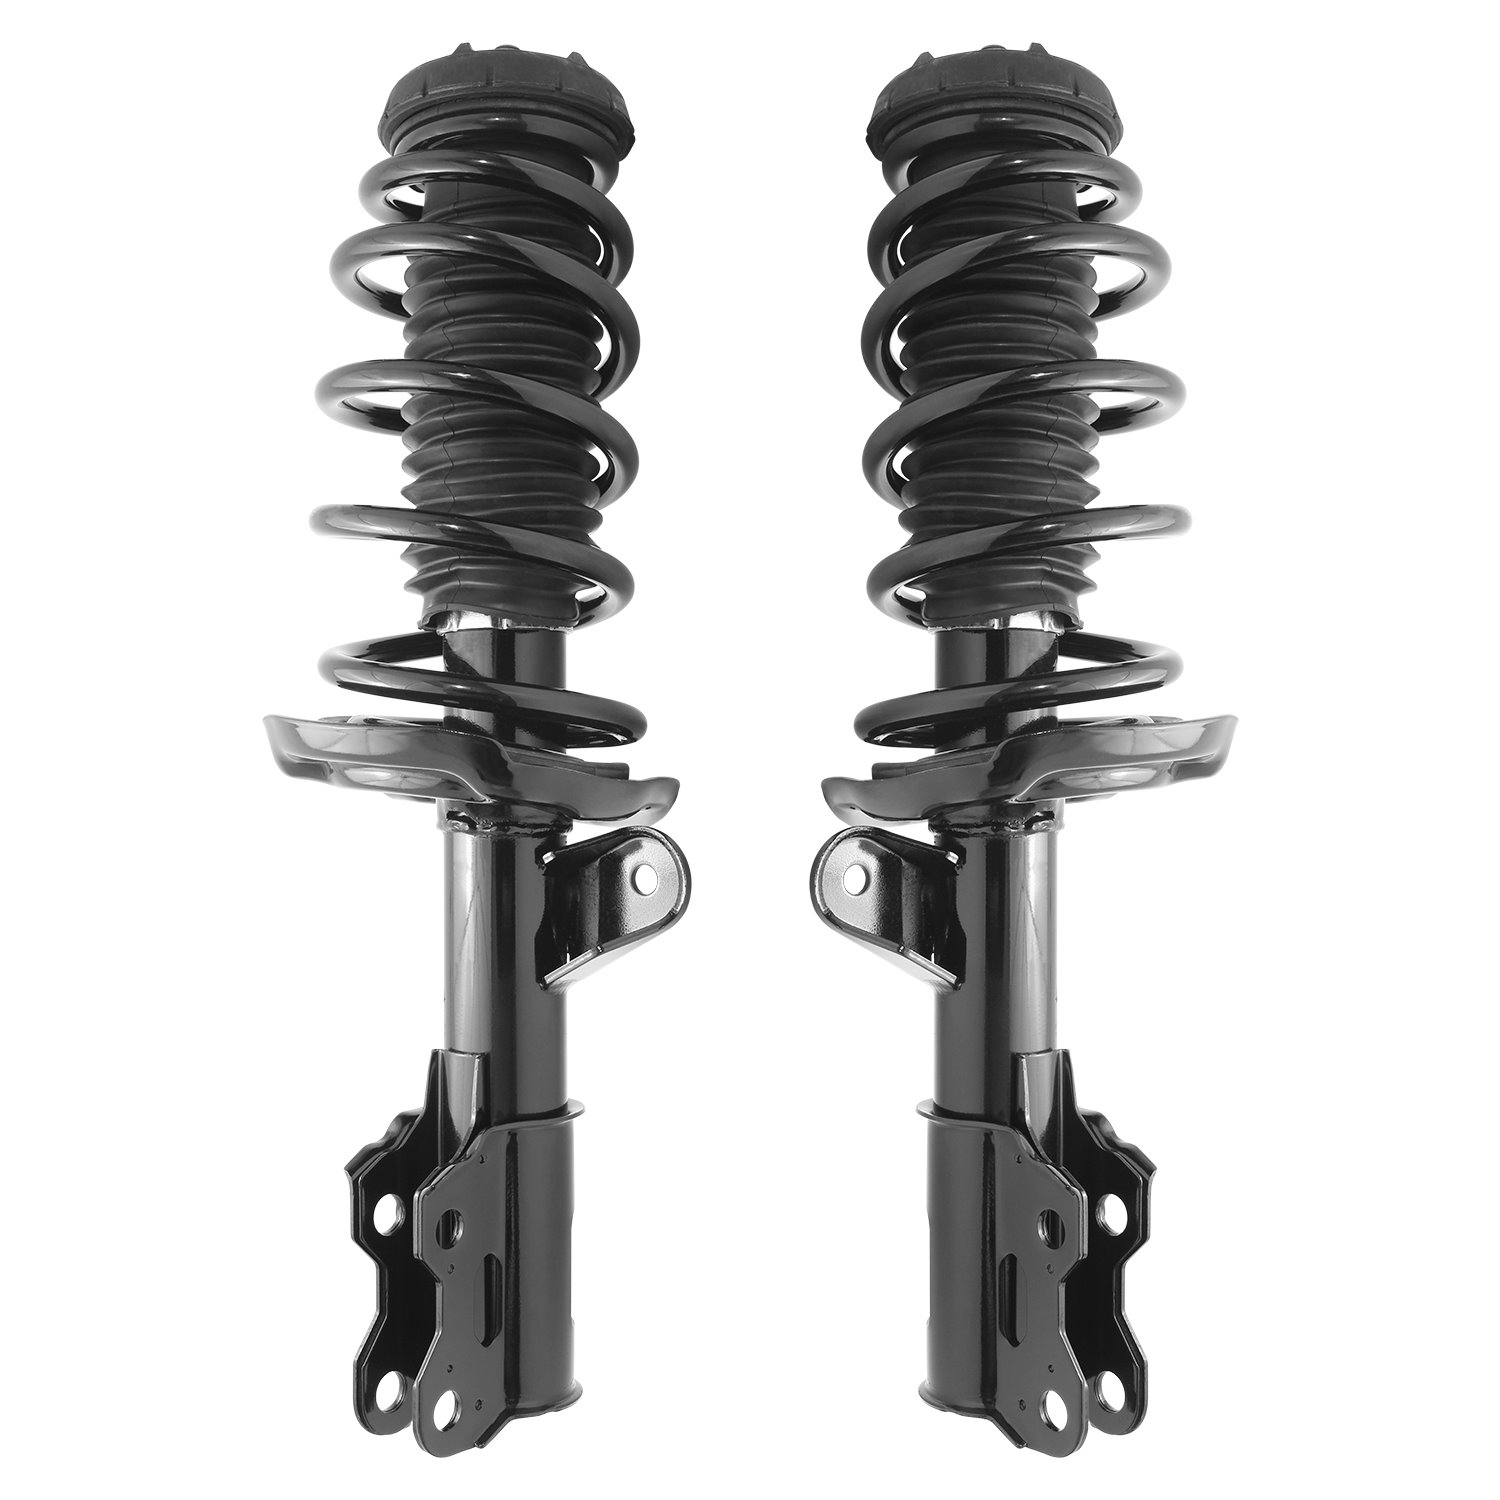 2-11715-11716-001 Suspension Strut & Coil Spring Assembly Set Fits Select Buick Encore, Chevy Trax